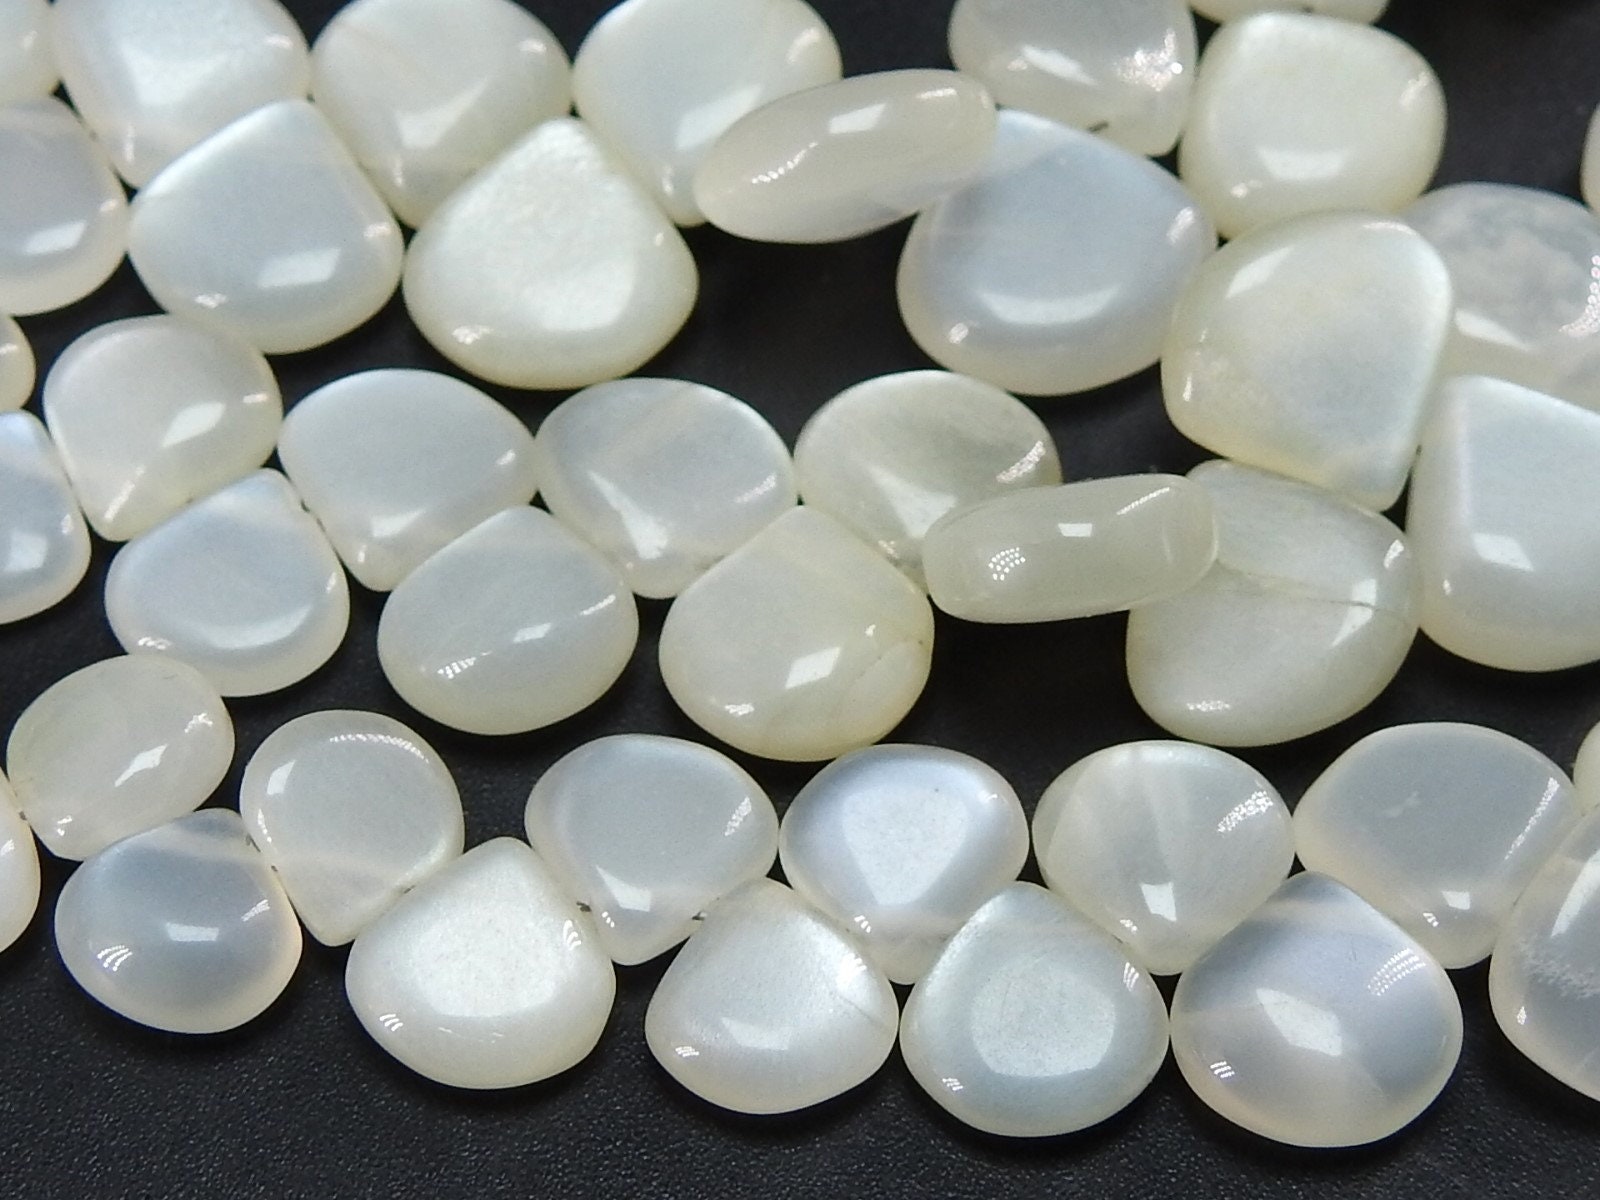 White Moonstone Smooth Heart,Teardrop,Drop,Loose Stone,Handmade Bead,For Making Jewelry,Wholesaler,Supplies 8Inch 6X12MM Approx (pme)BR2 | Save 33% - Rajasthan Living 16